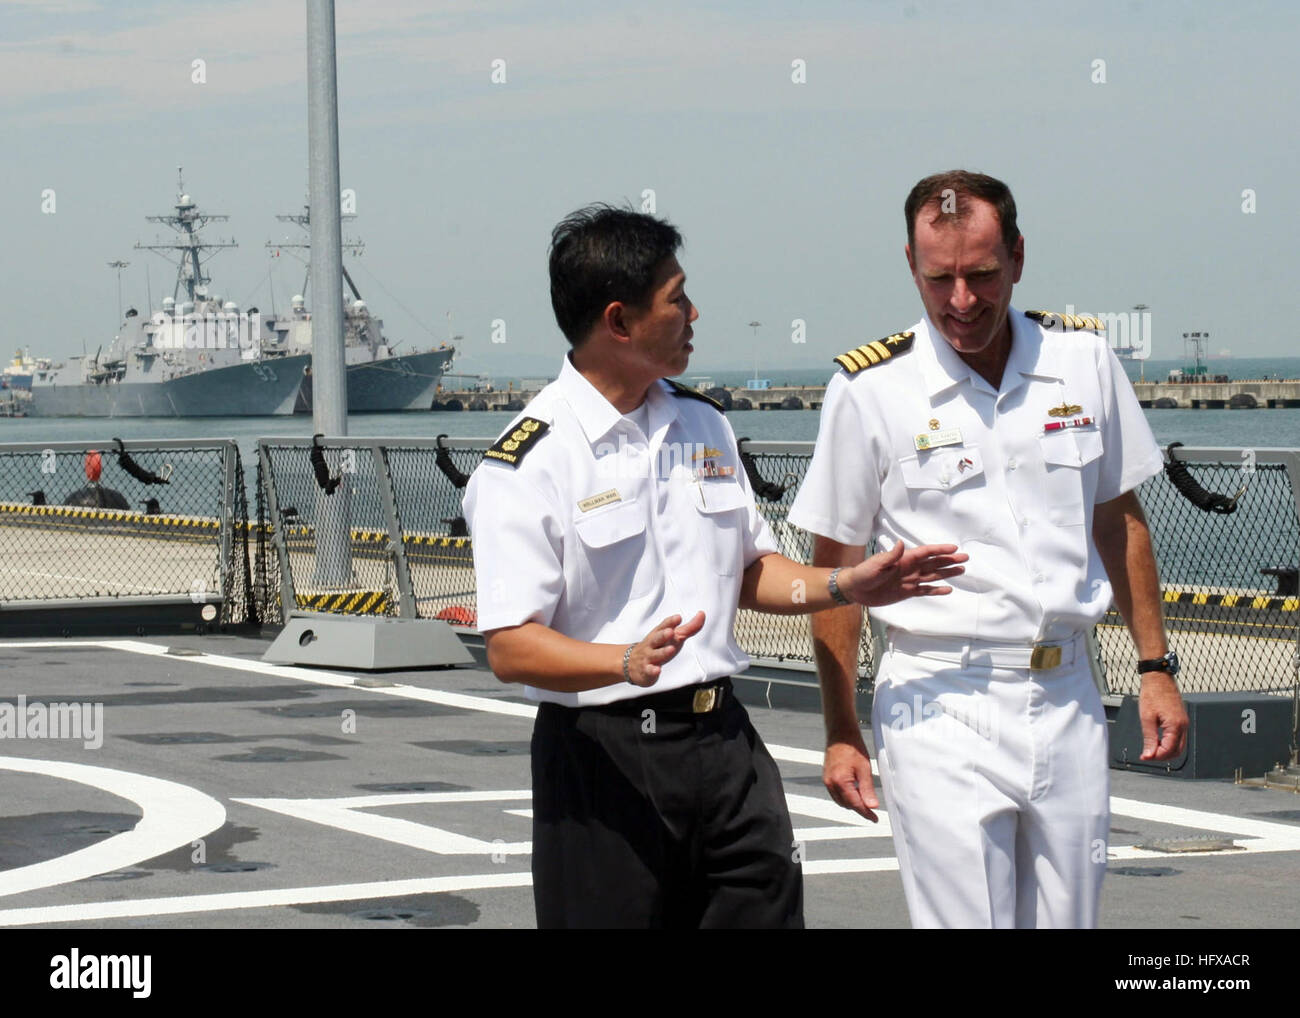 090608-N-8467B-026 SINGAPORE (June 8, 2009) Commodore William A. Kearns III, right, Commander, Task Group 73.5, visits with Col. Wellman Wan, Commander, First Flotilla, Republic of Singapore Navy, aboard the Republic of Singapore Navy frigate RSS Intrepid after the opening ceremony for the Singapore phase of Cooperation Afloat Readiness and Training (CARAT) 2009 at Changi Naval Base. CARAT is a series of bilateral exercises held annually in Southeast Asia to strengthen relationships and enhance the operational readiness of the participating forces. (U.S. Navy photo by Mass Communications Speci Stock Photo